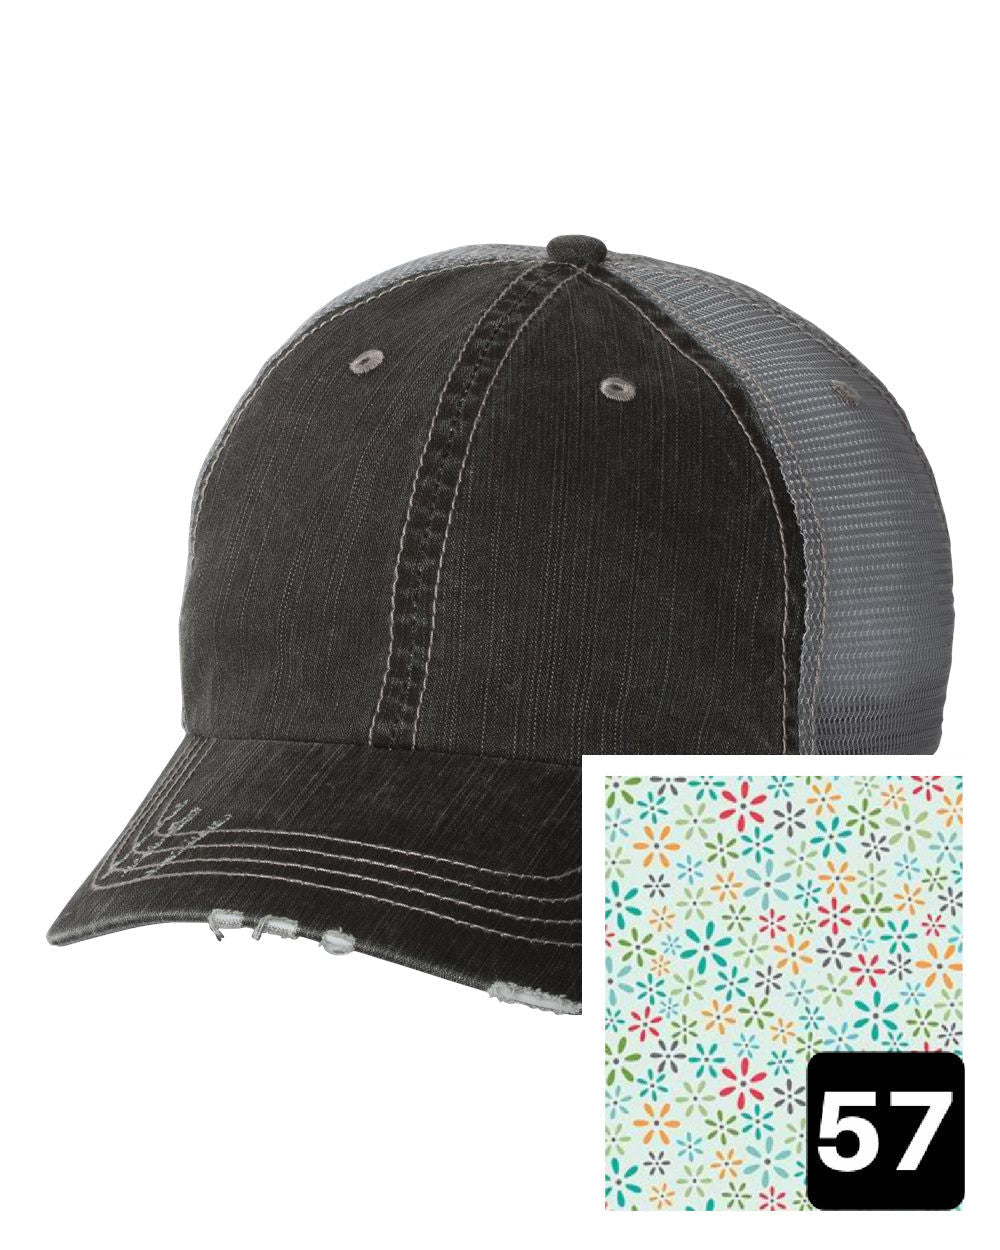 gray distressed trucker hat with white daisy on yellow fabric state of Washington